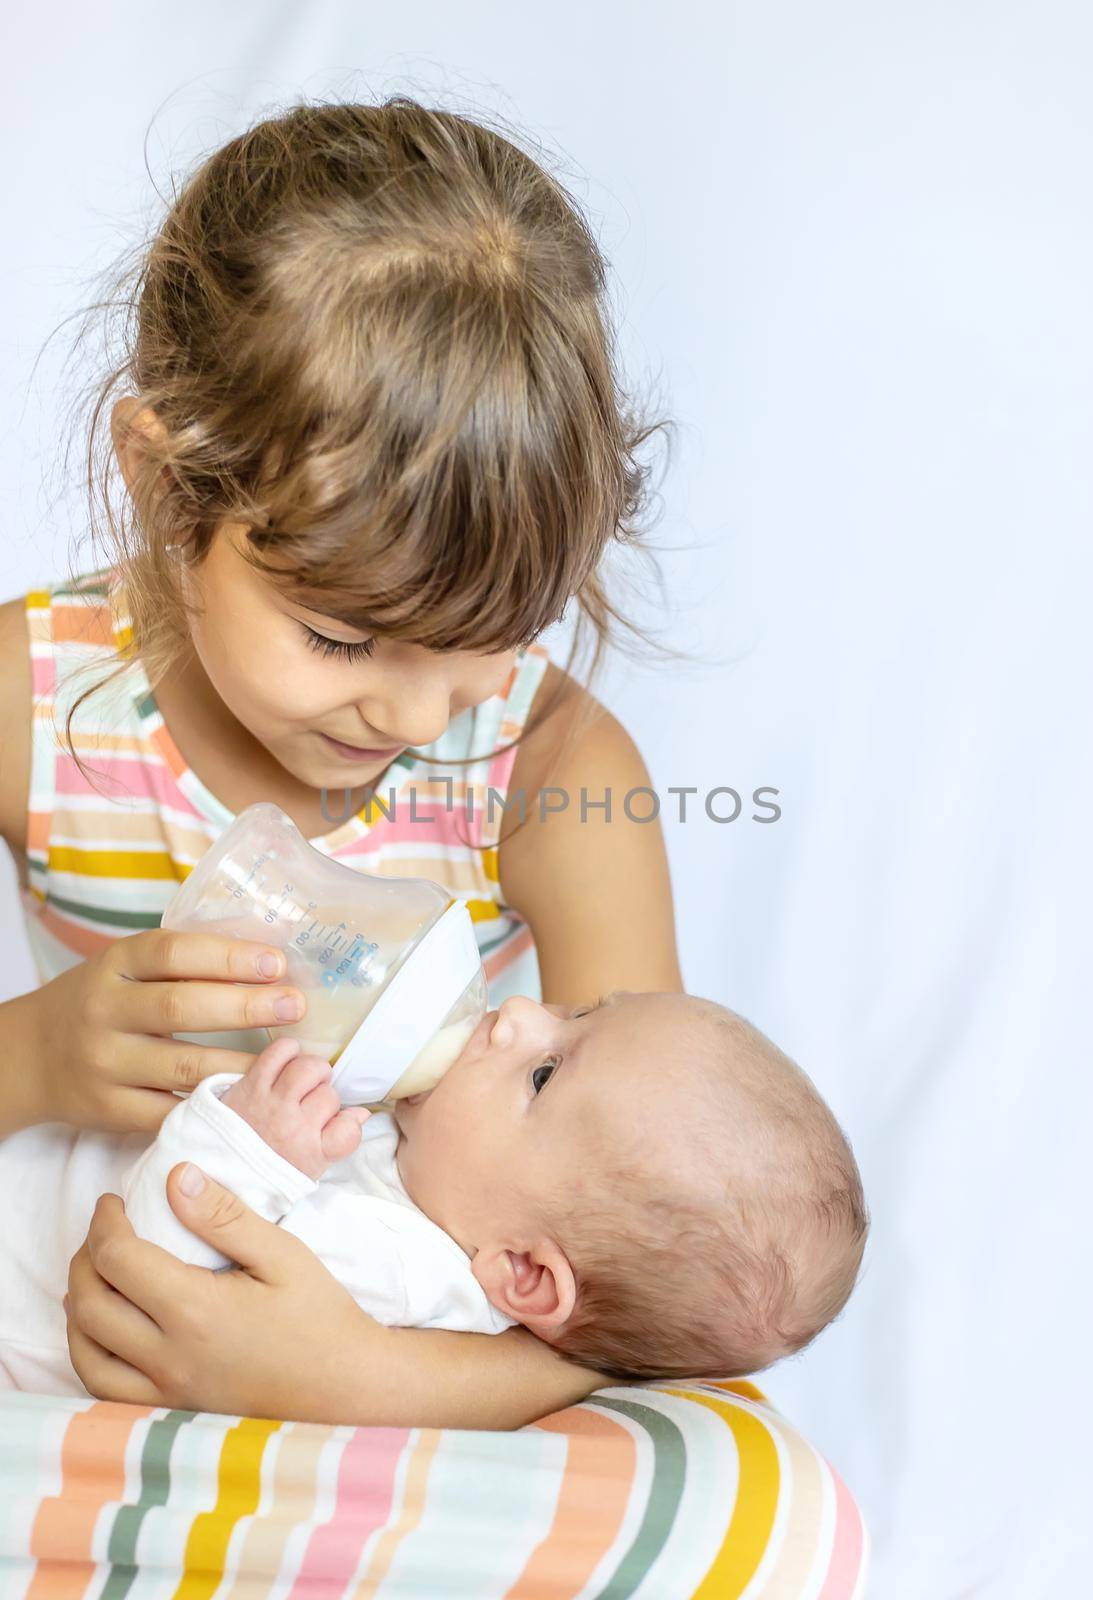 An older sister is feeding a newborn baby. Selective focus. People.